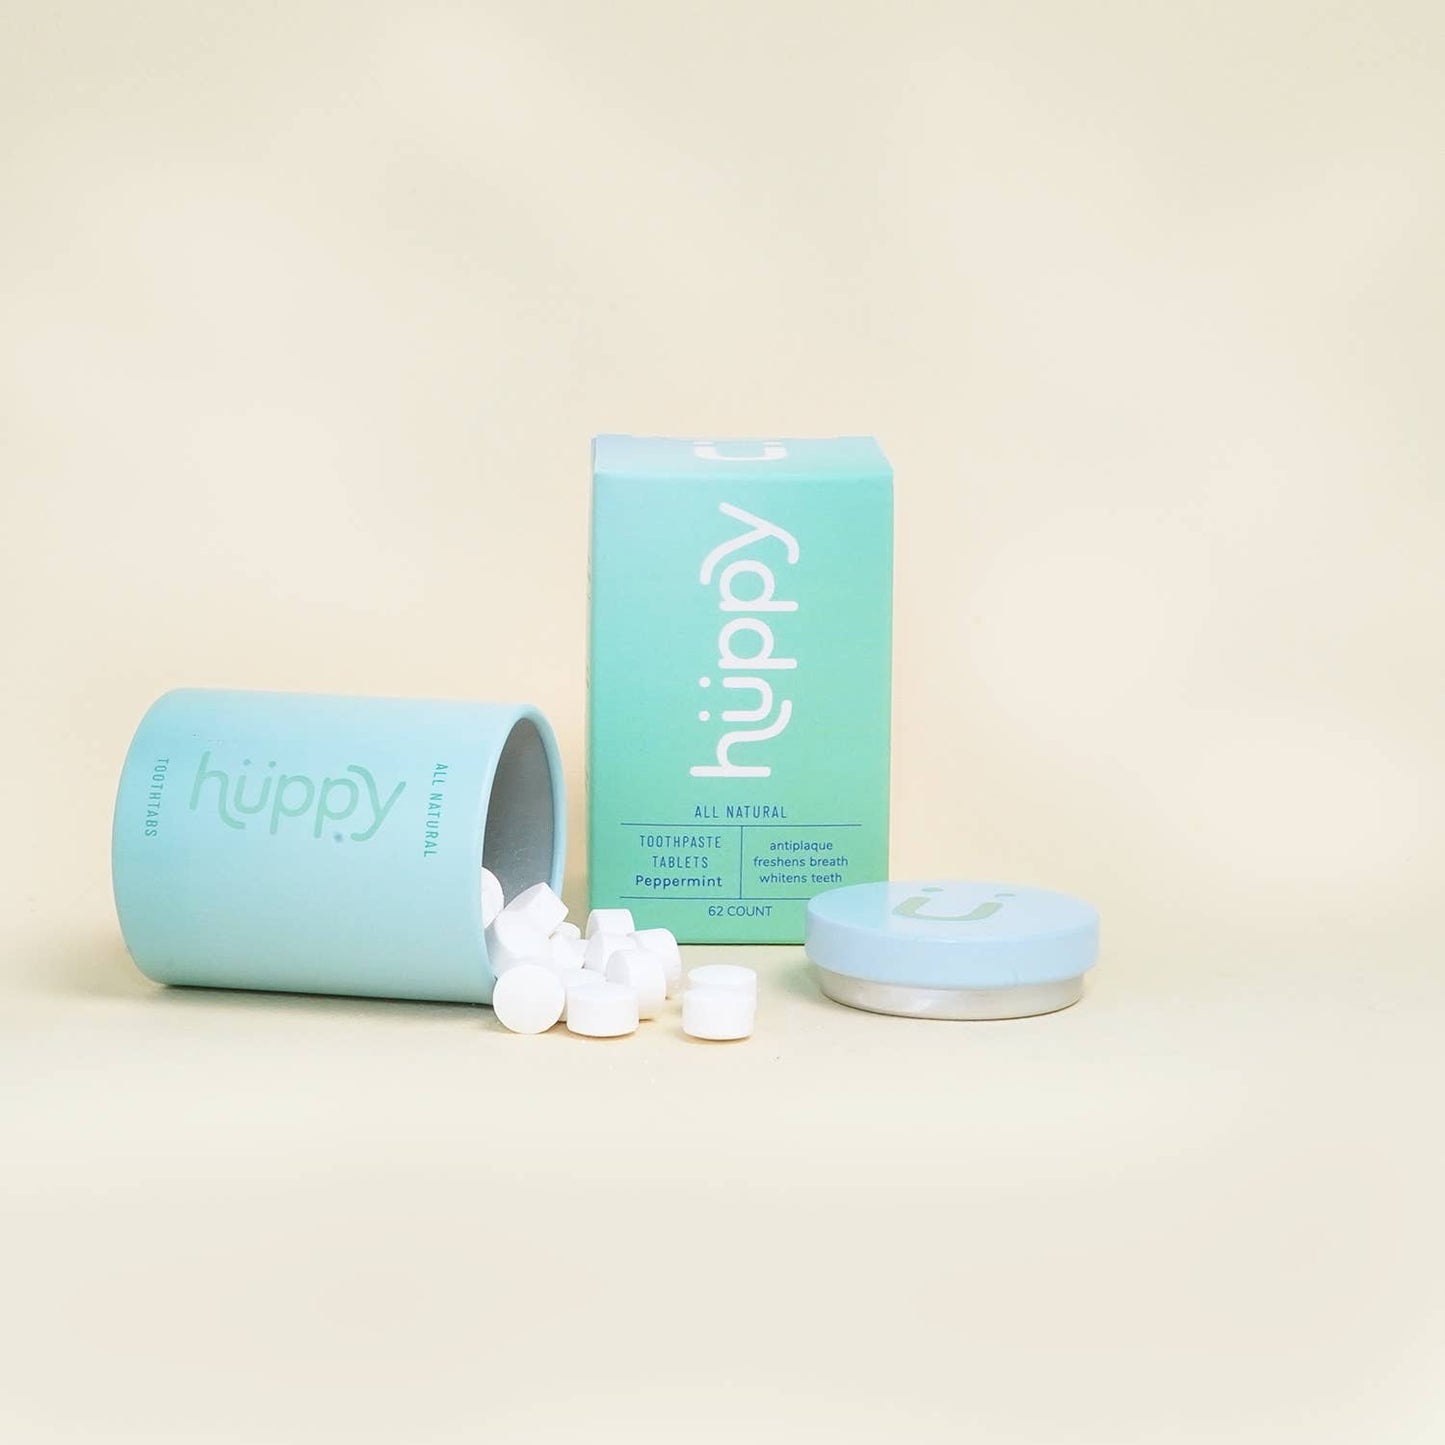 Huppy toothpaste tablets in a blue round metal container, laid on its side with tablets coming out.  The blue box and blue lid are sitting next to them.  